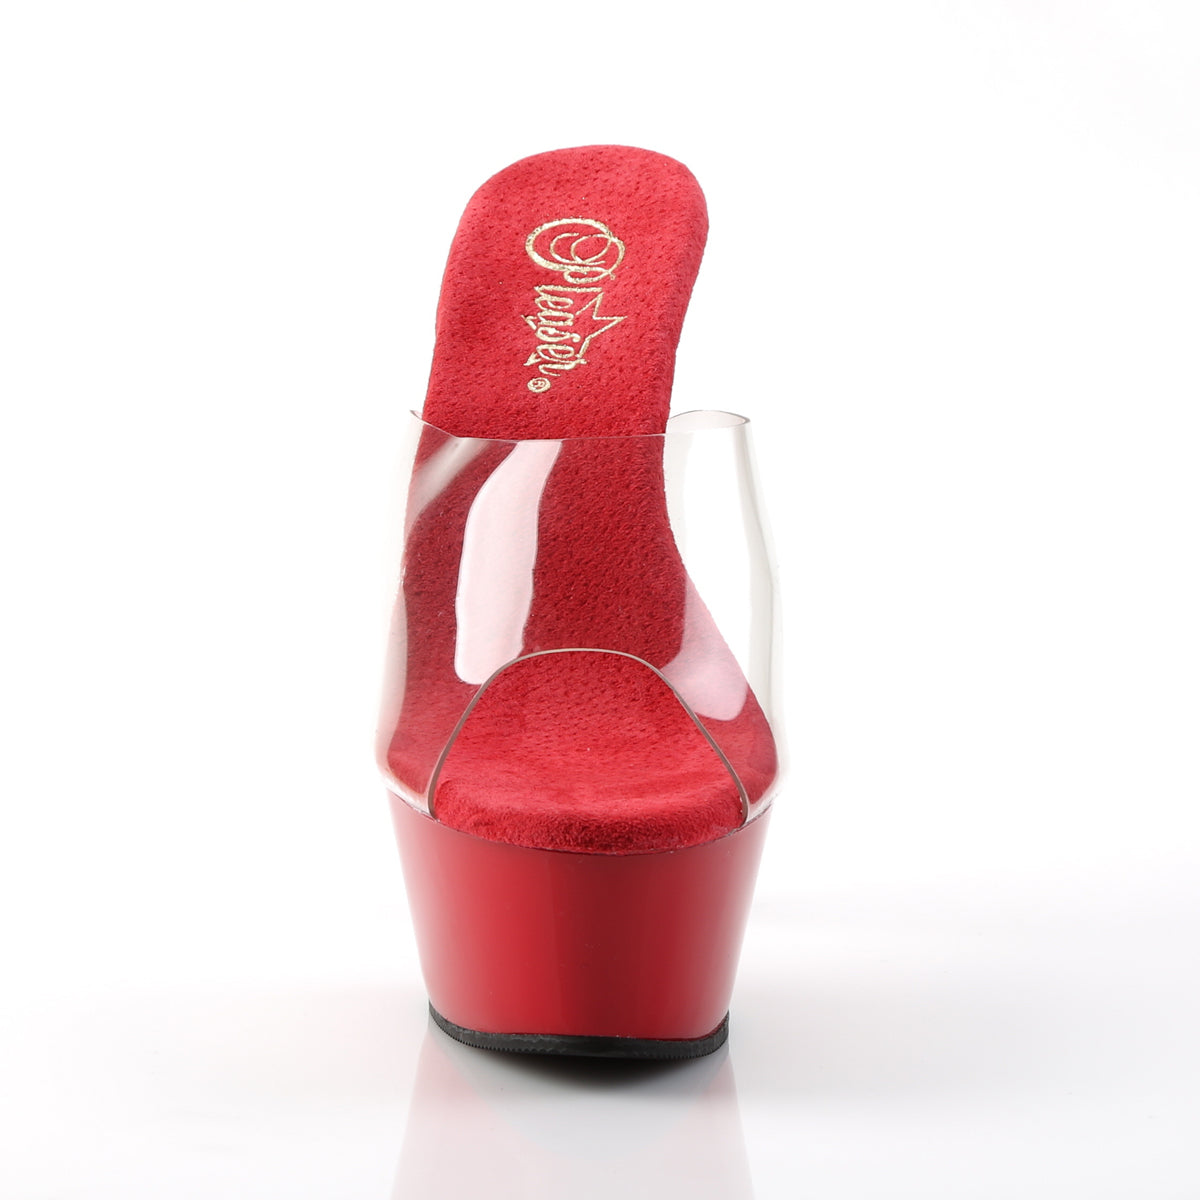 KISS-201 Pleaser 6" Heel Clear and Red Pole Dancing Platform-Pleaser- Sexy Shoes Alternative Footwear